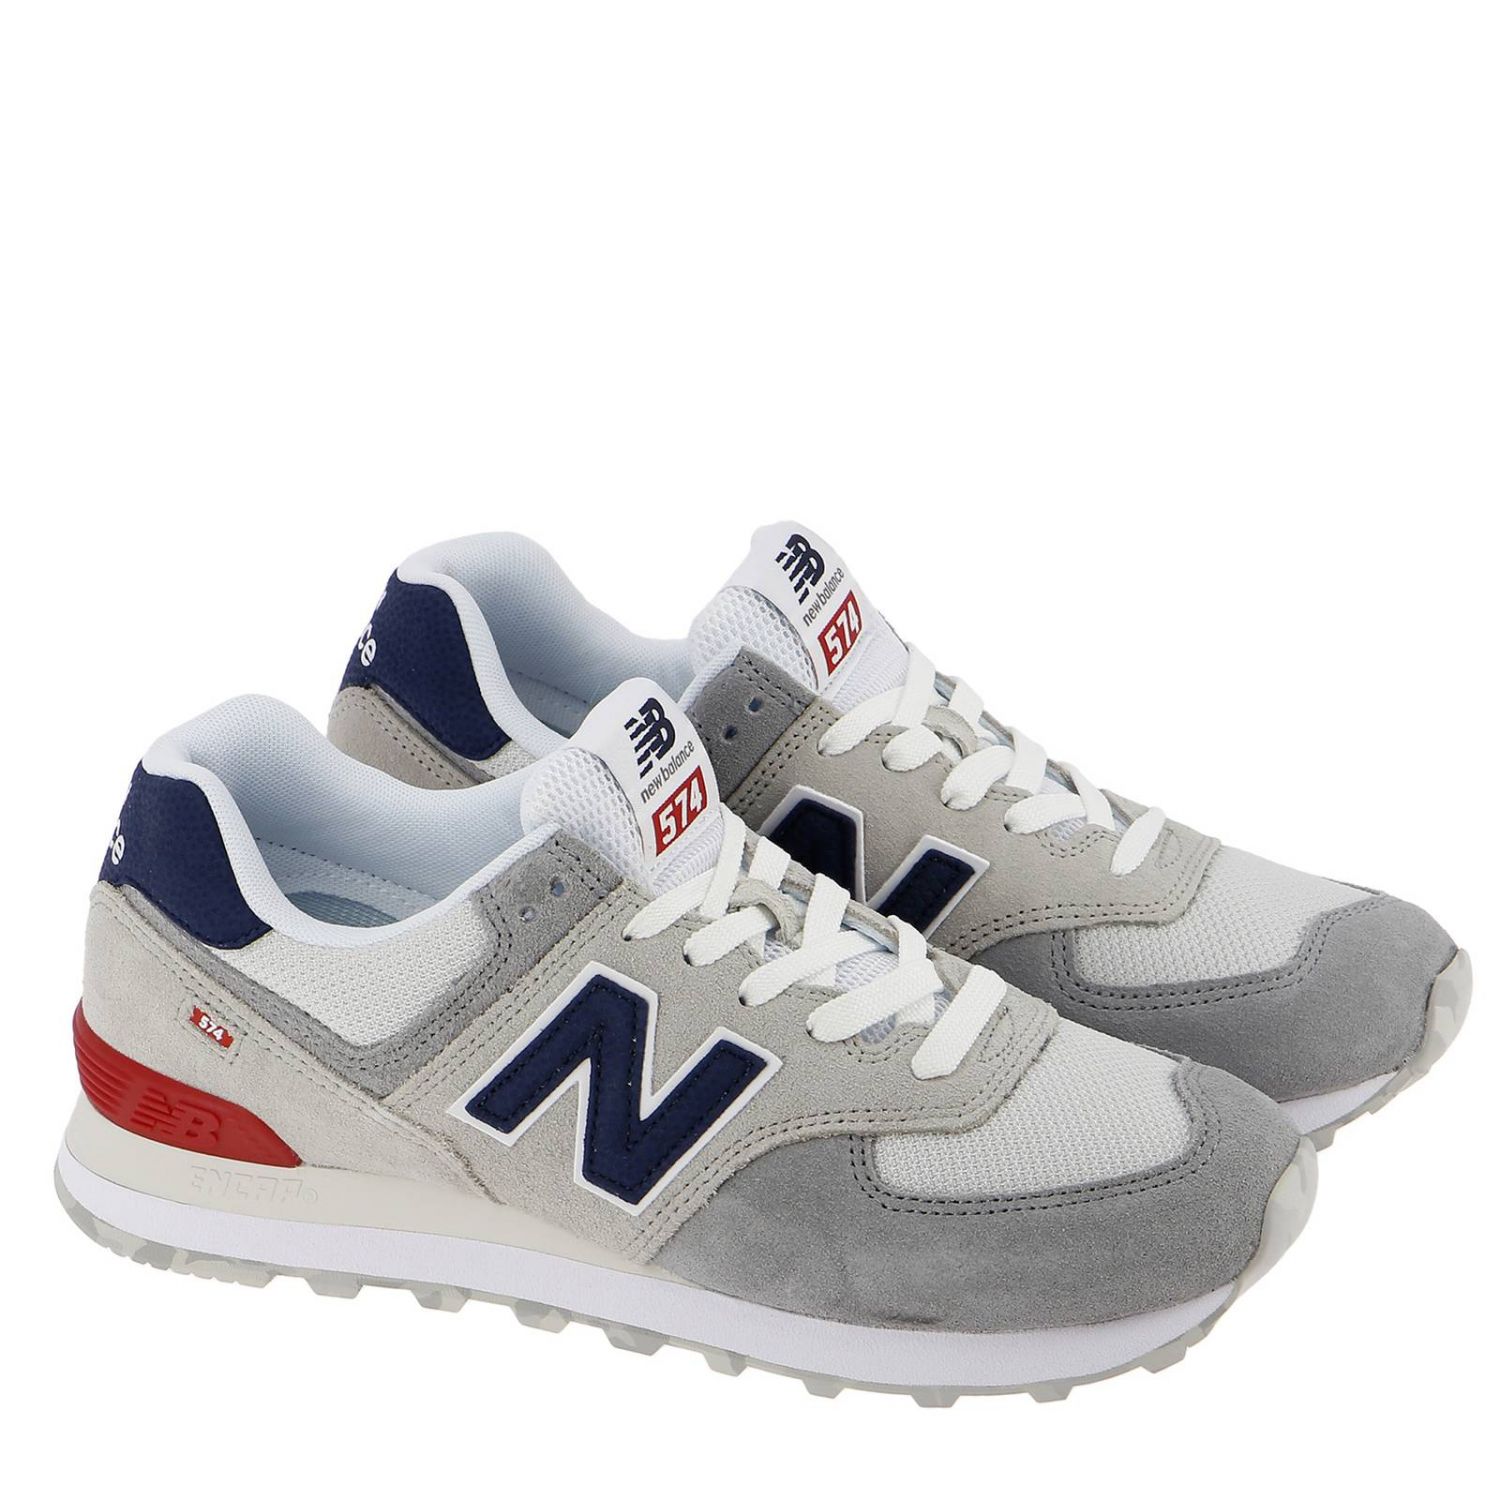 Shoes men New Balance Sneakers New Balance Men White Sneakers New